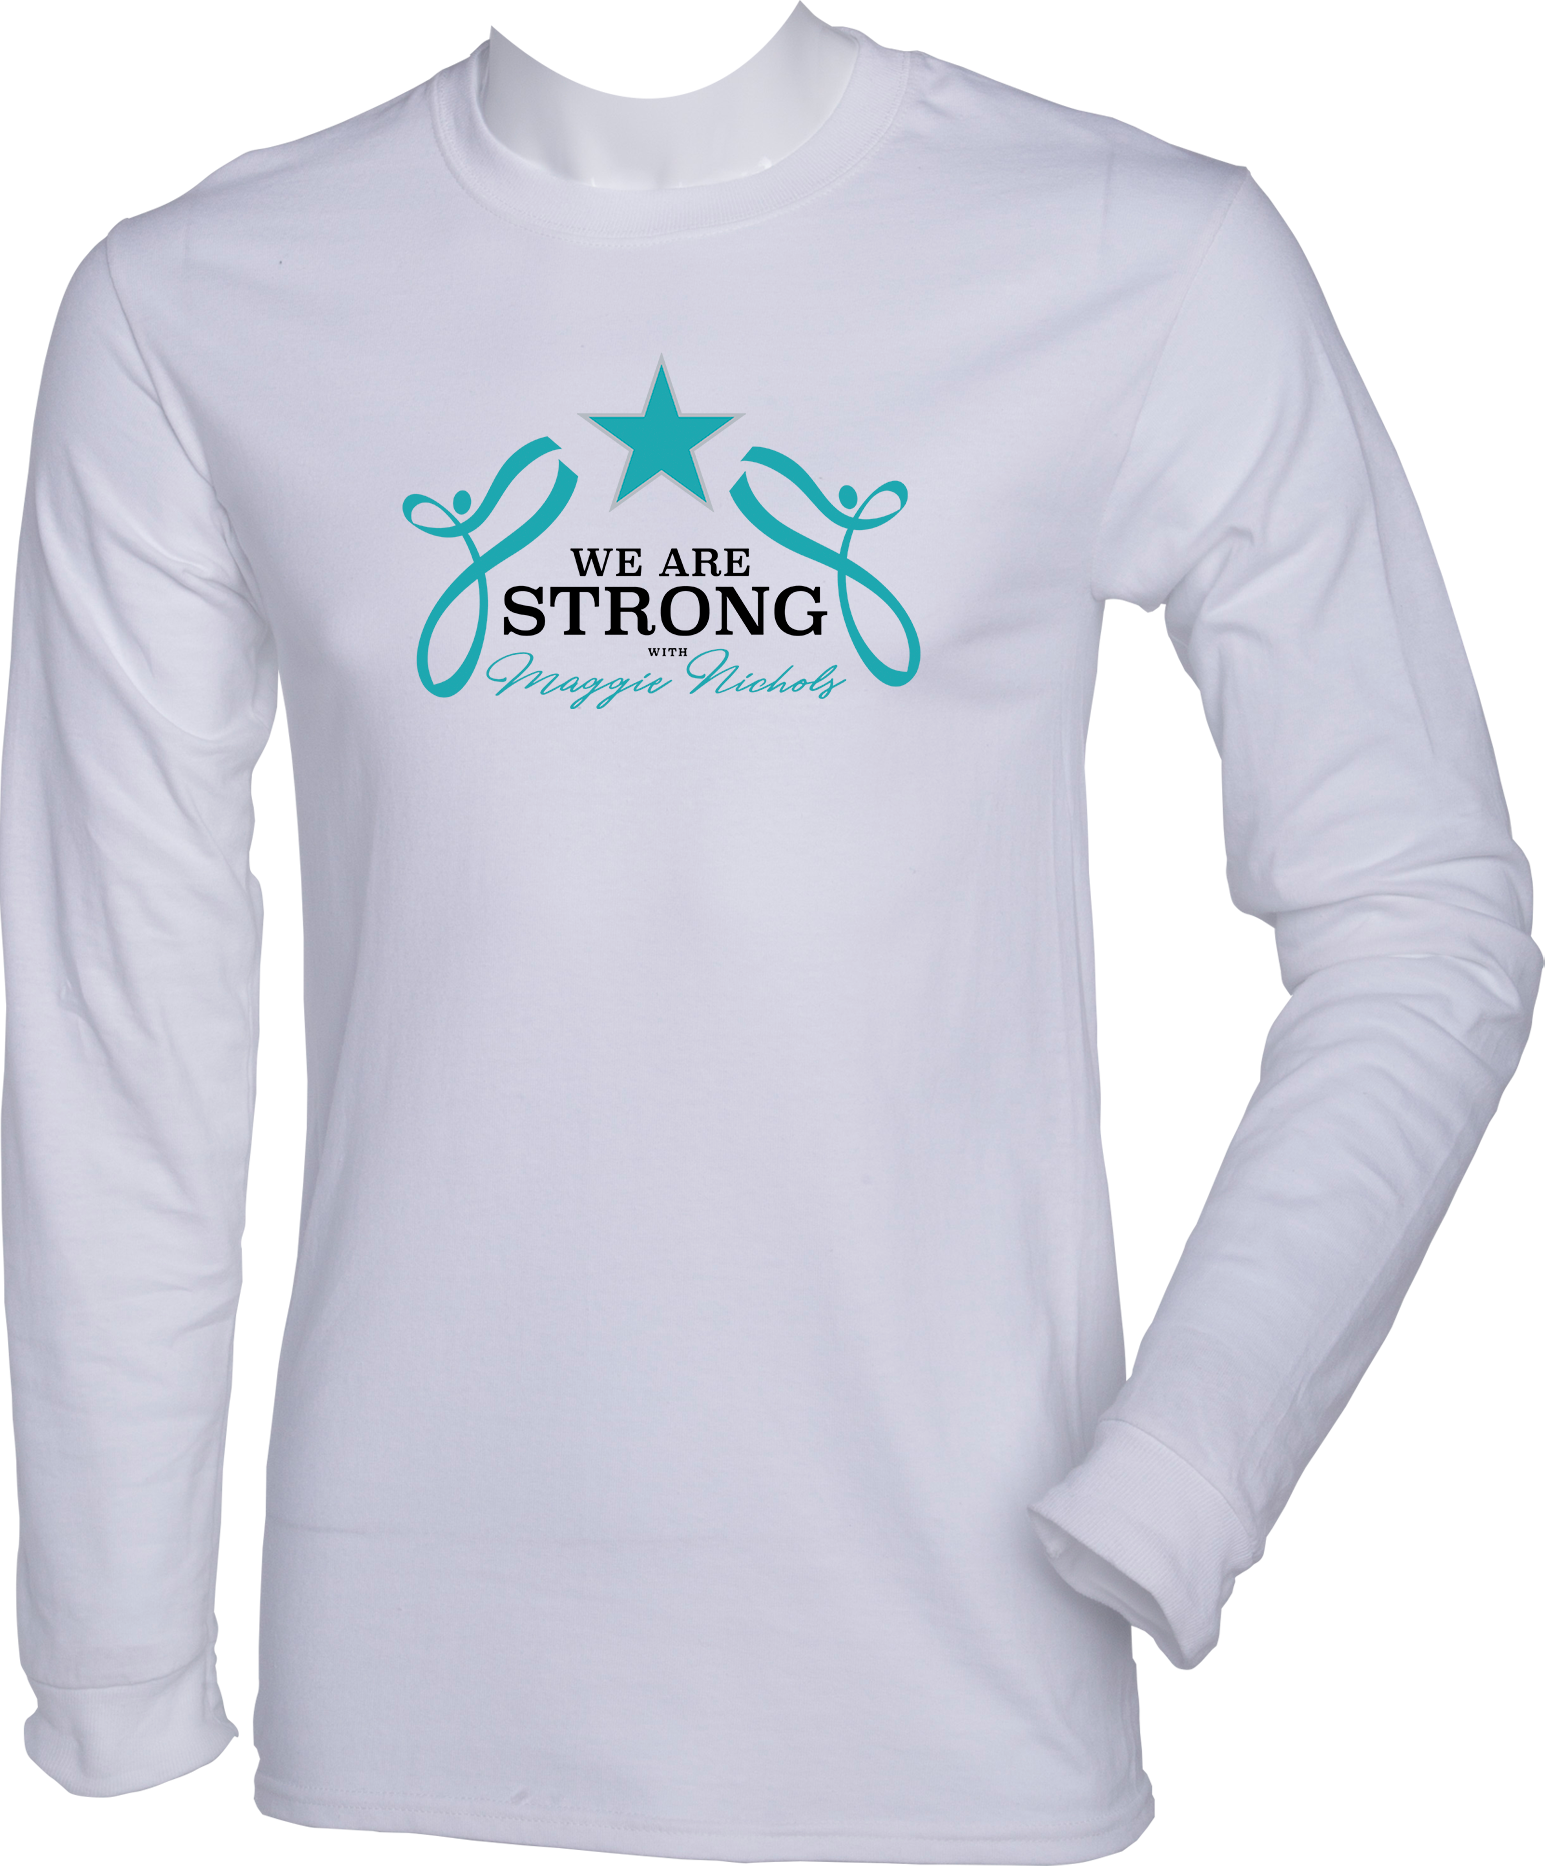 LONG SLEEVES -2023 We Are Strong with Maggie Nichols